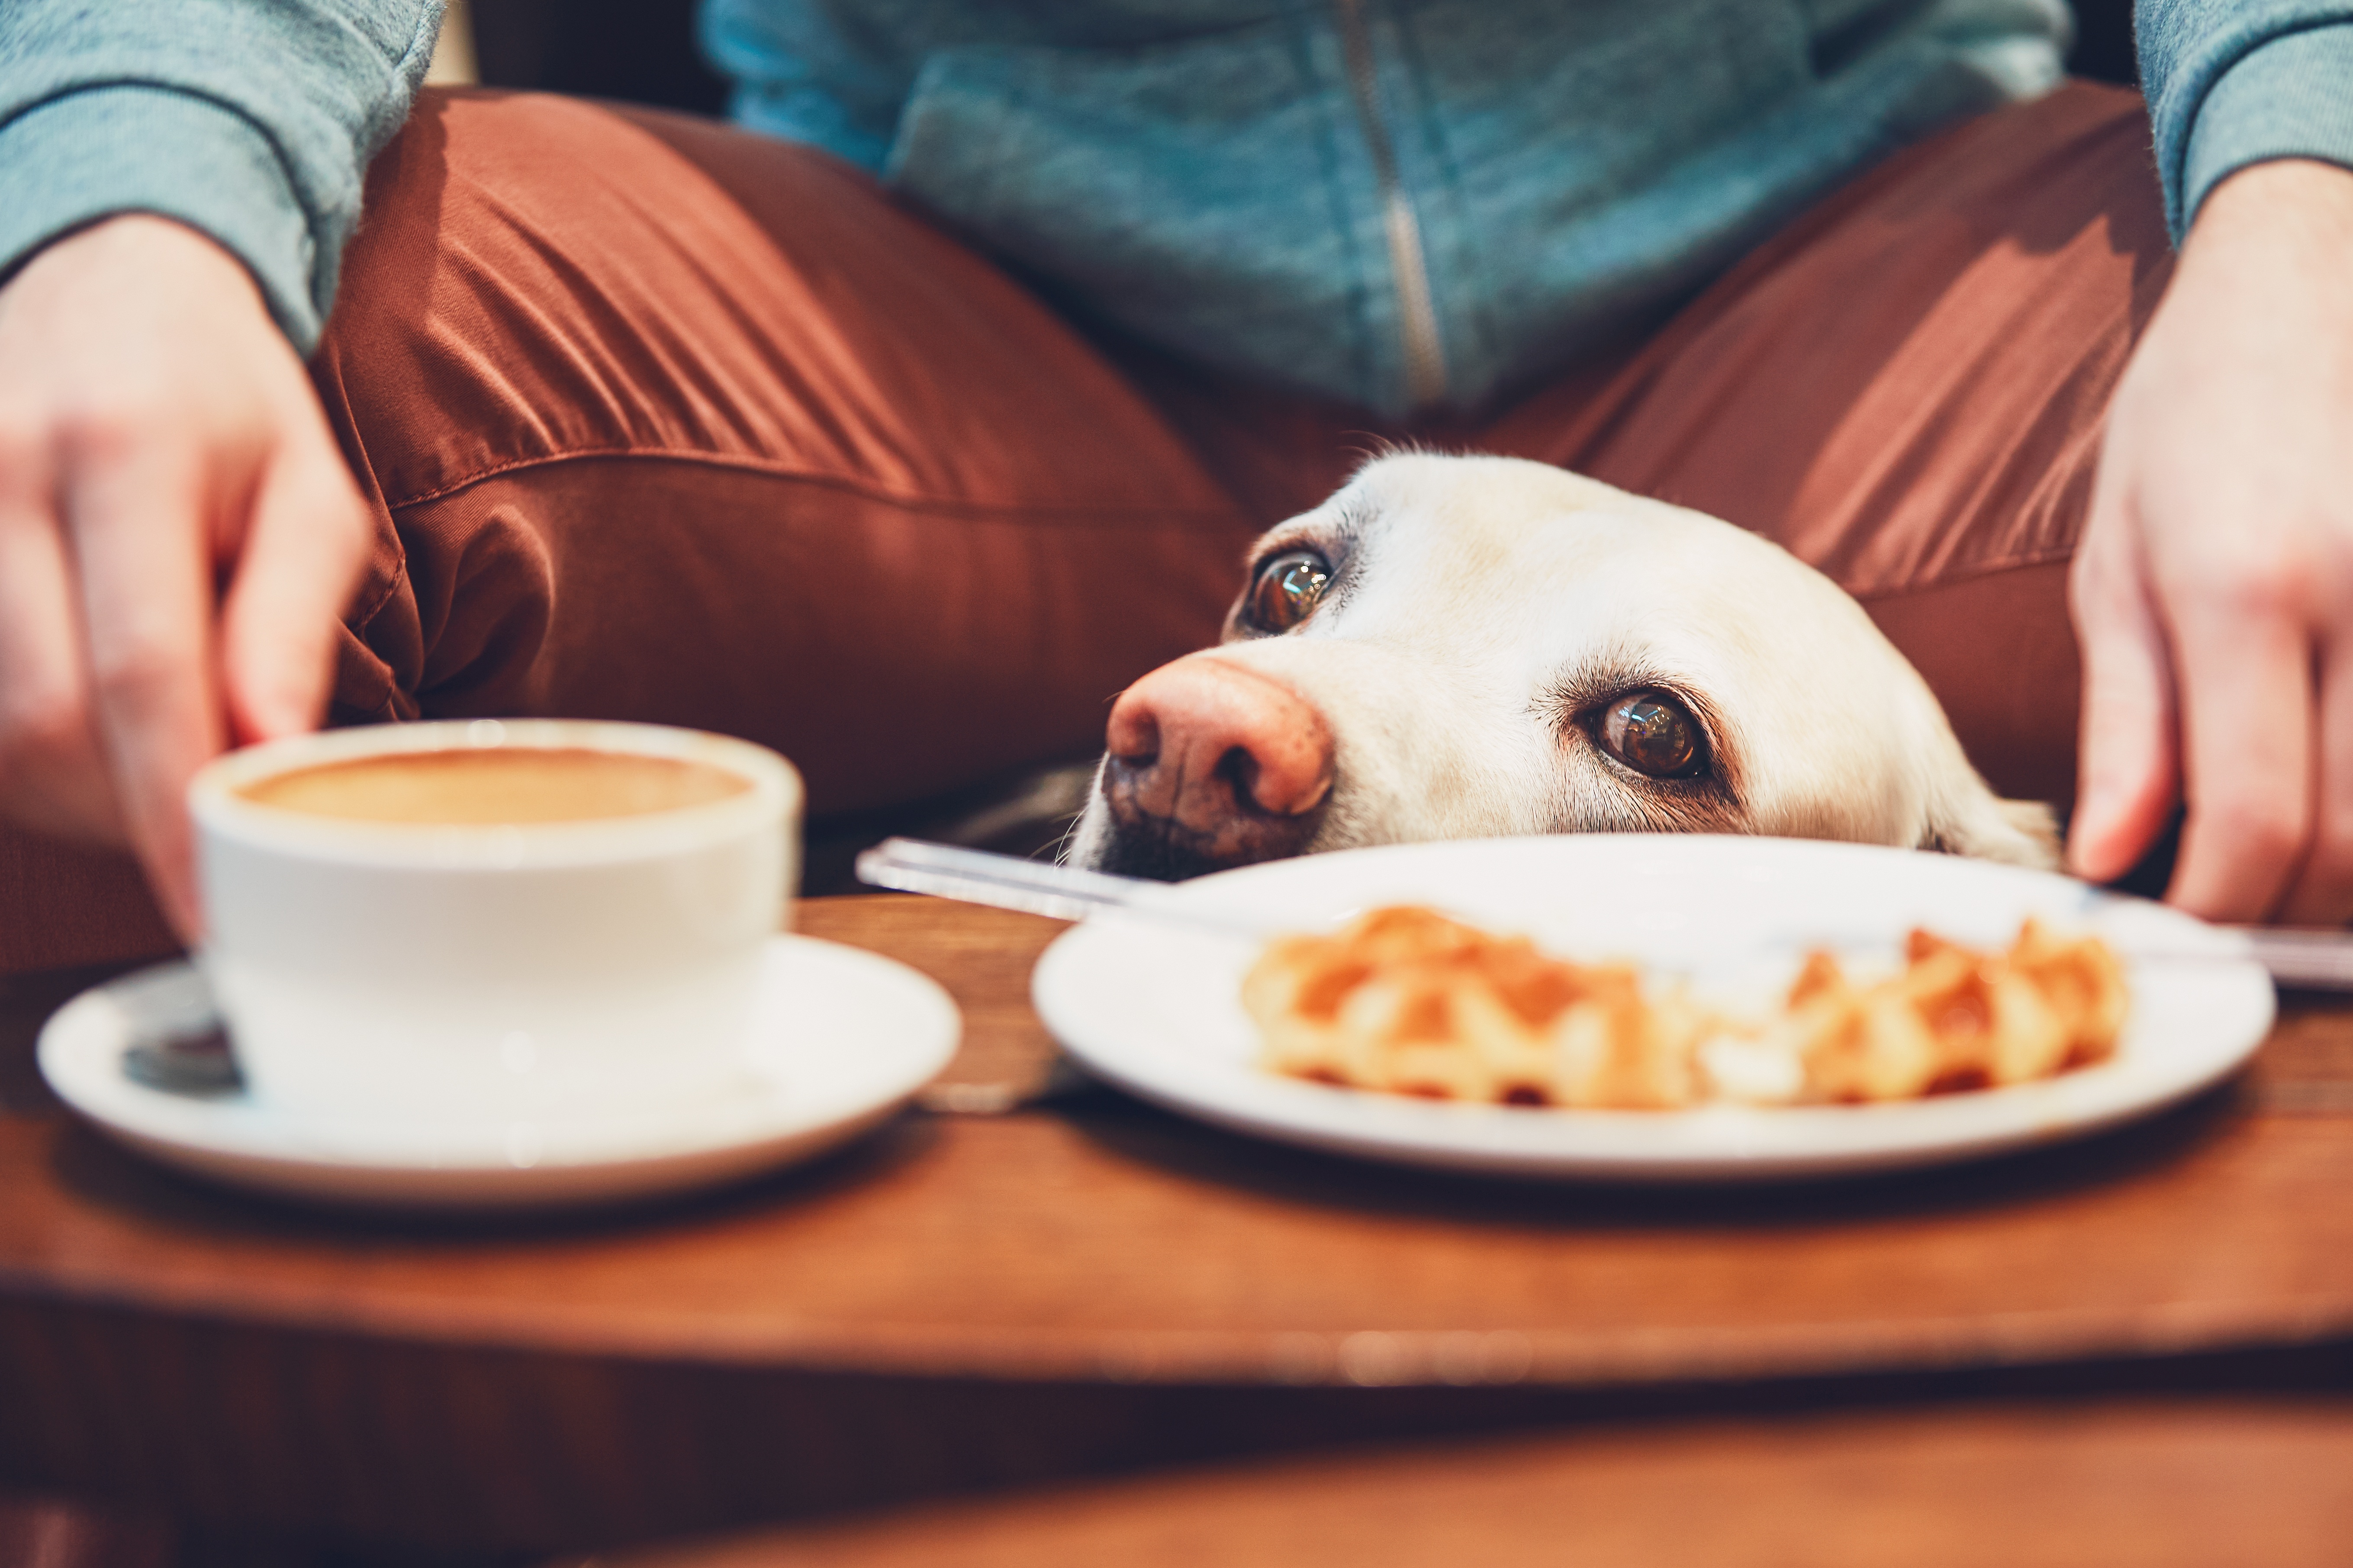 A curious but obedient dog looks at a cup of coffee and a waffle in a dog-friendly cafe.